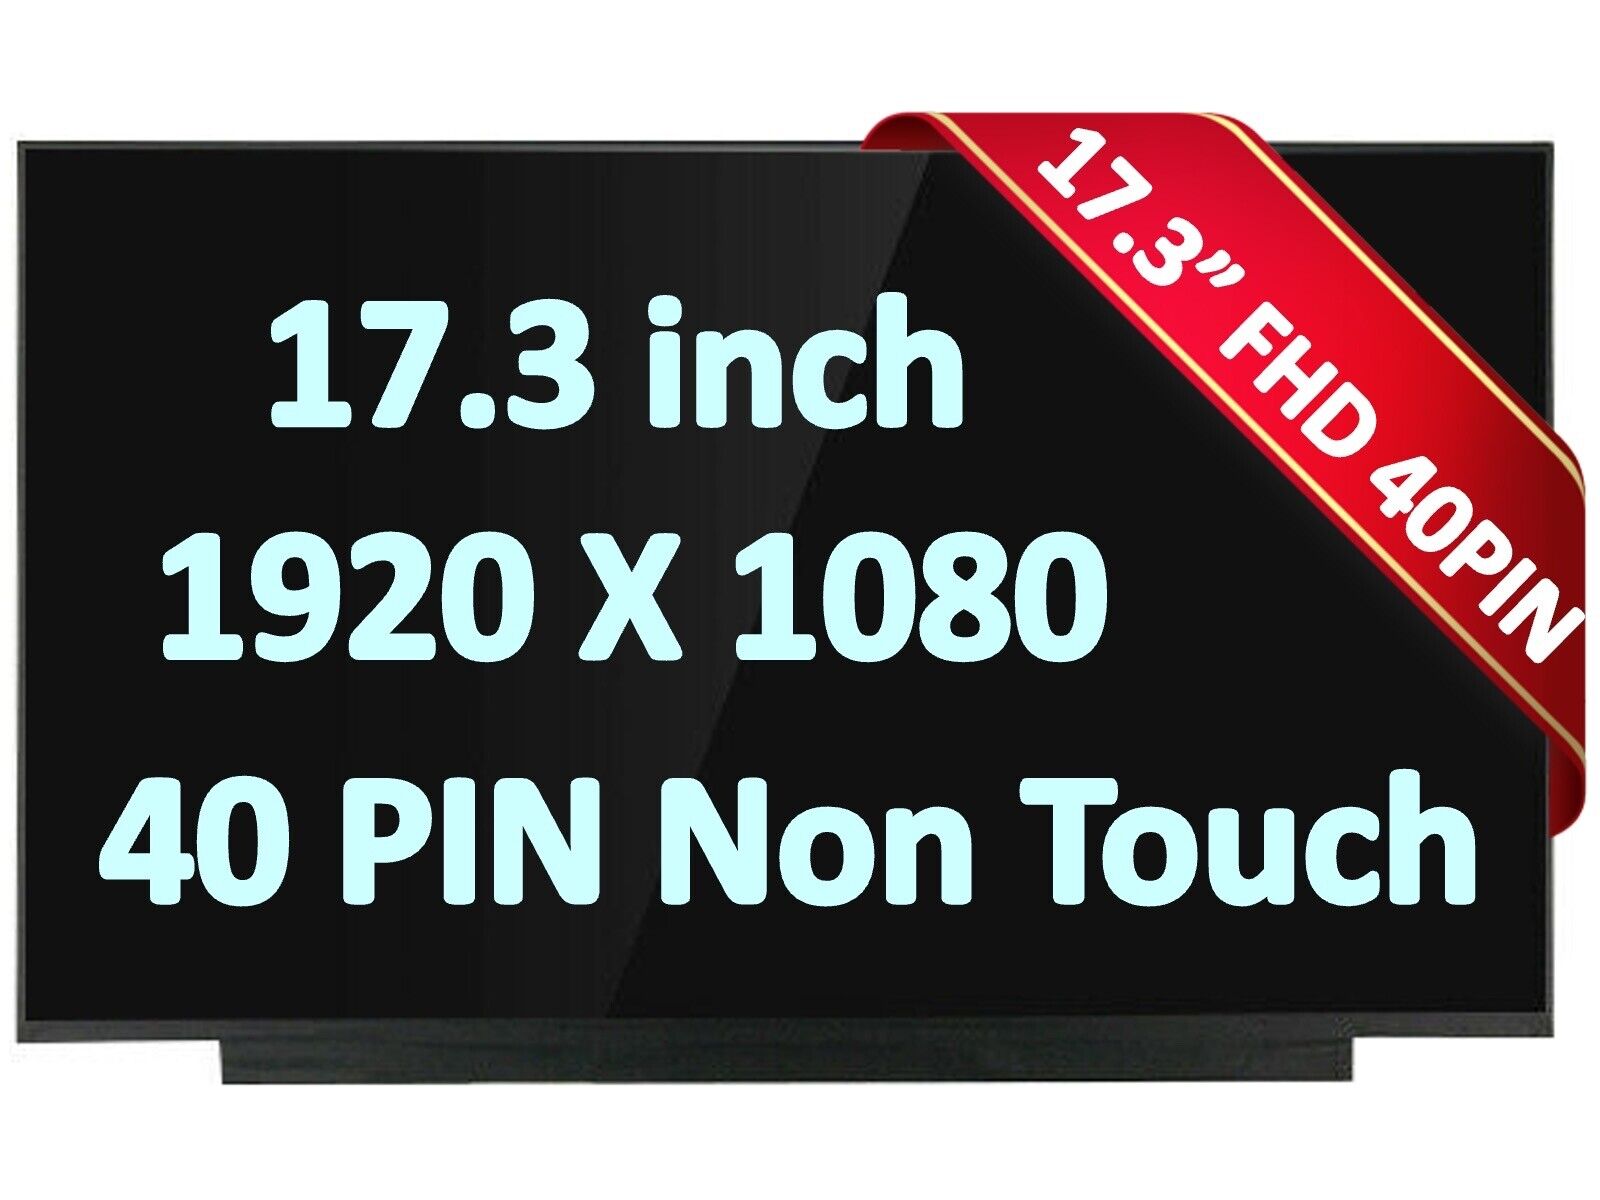 New LED LCD Screen for 40pin Narrow 300Hz FHD MSI MS-17K3 MS-17K2 MS-17K1 FHD